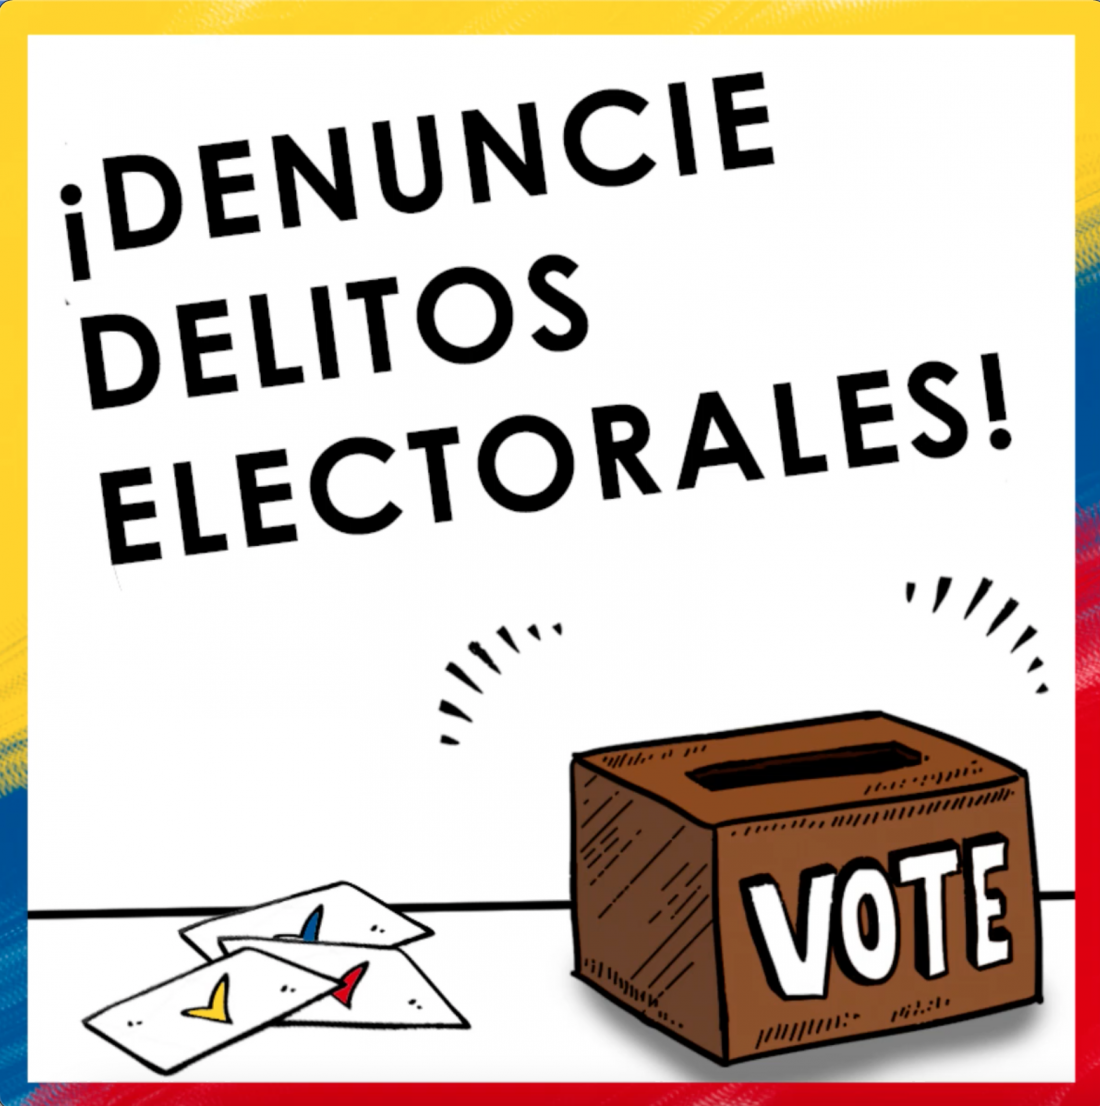 A voting box with ballots to the left, text on the top of the image reads "Denuncie Delitos Electorales"